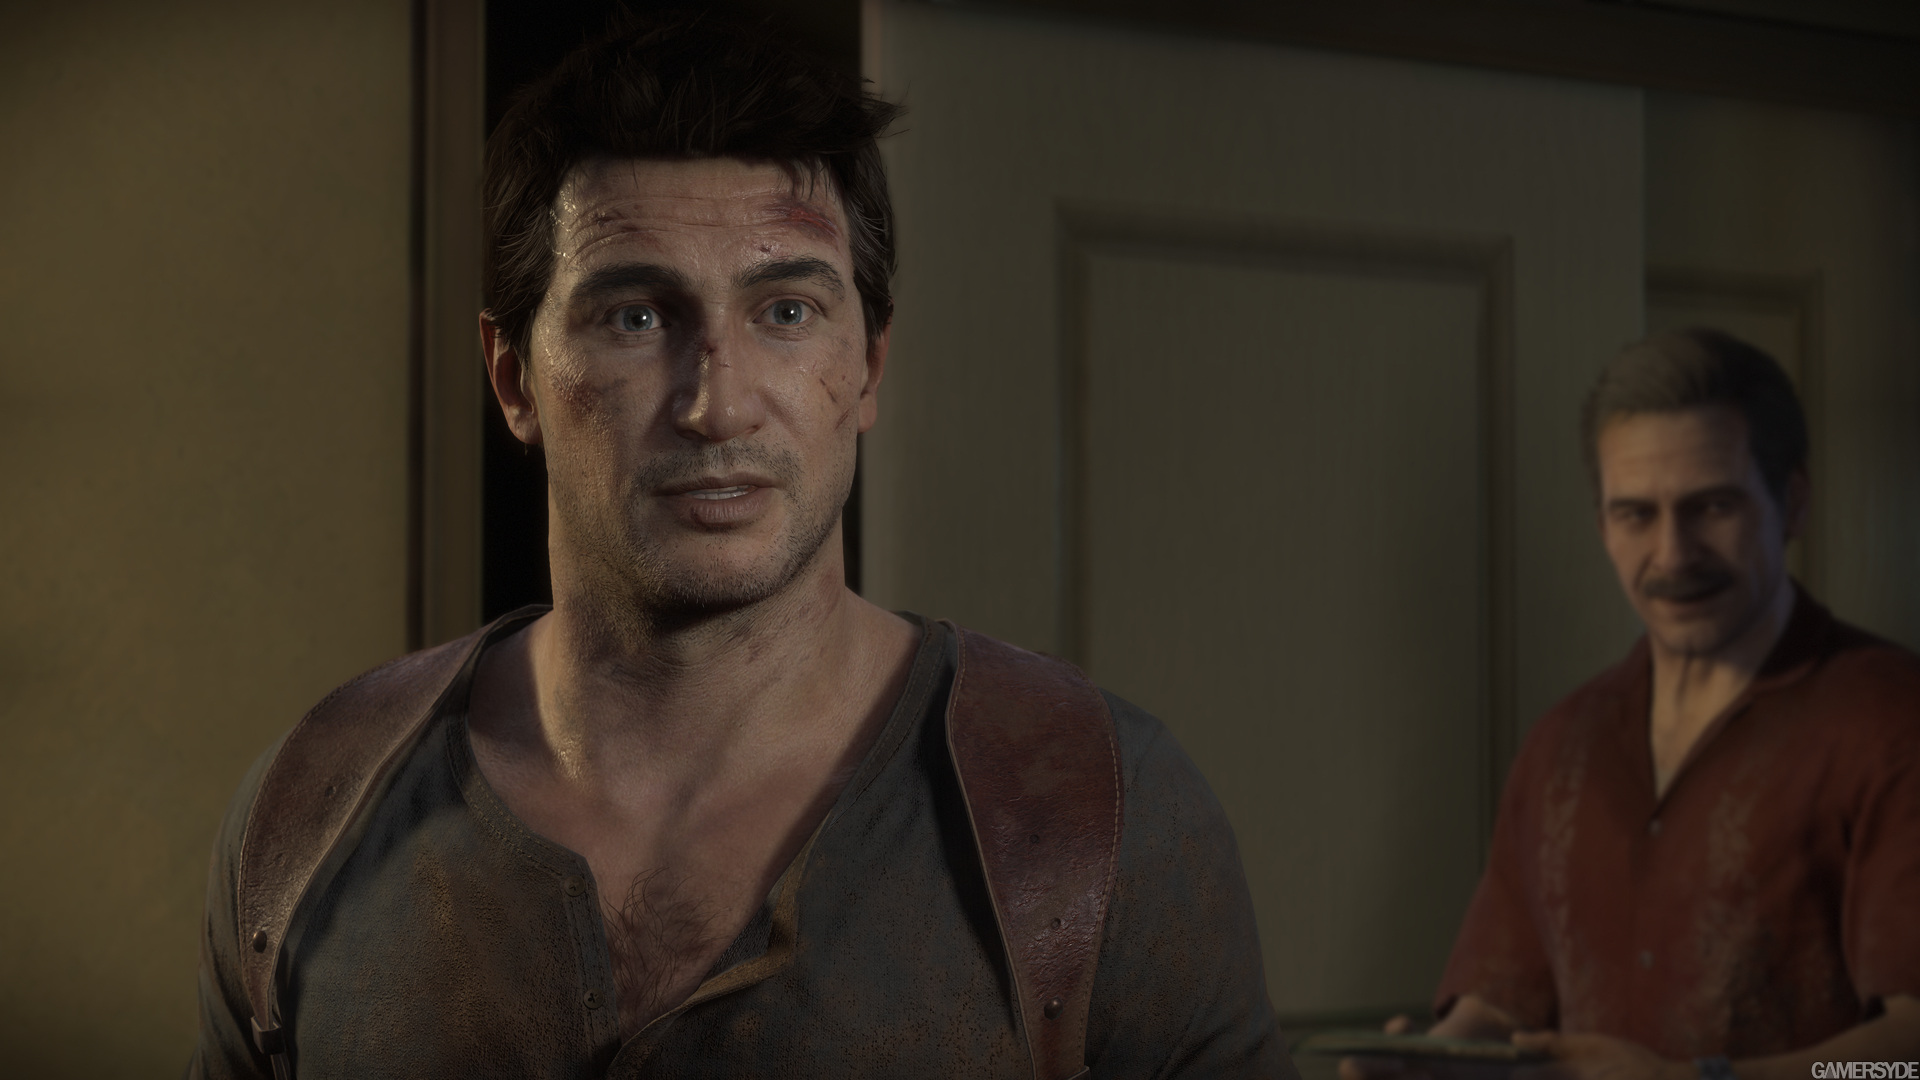 image_uncharted_4_a_thief_s_end-28644-2995_0010.jpg